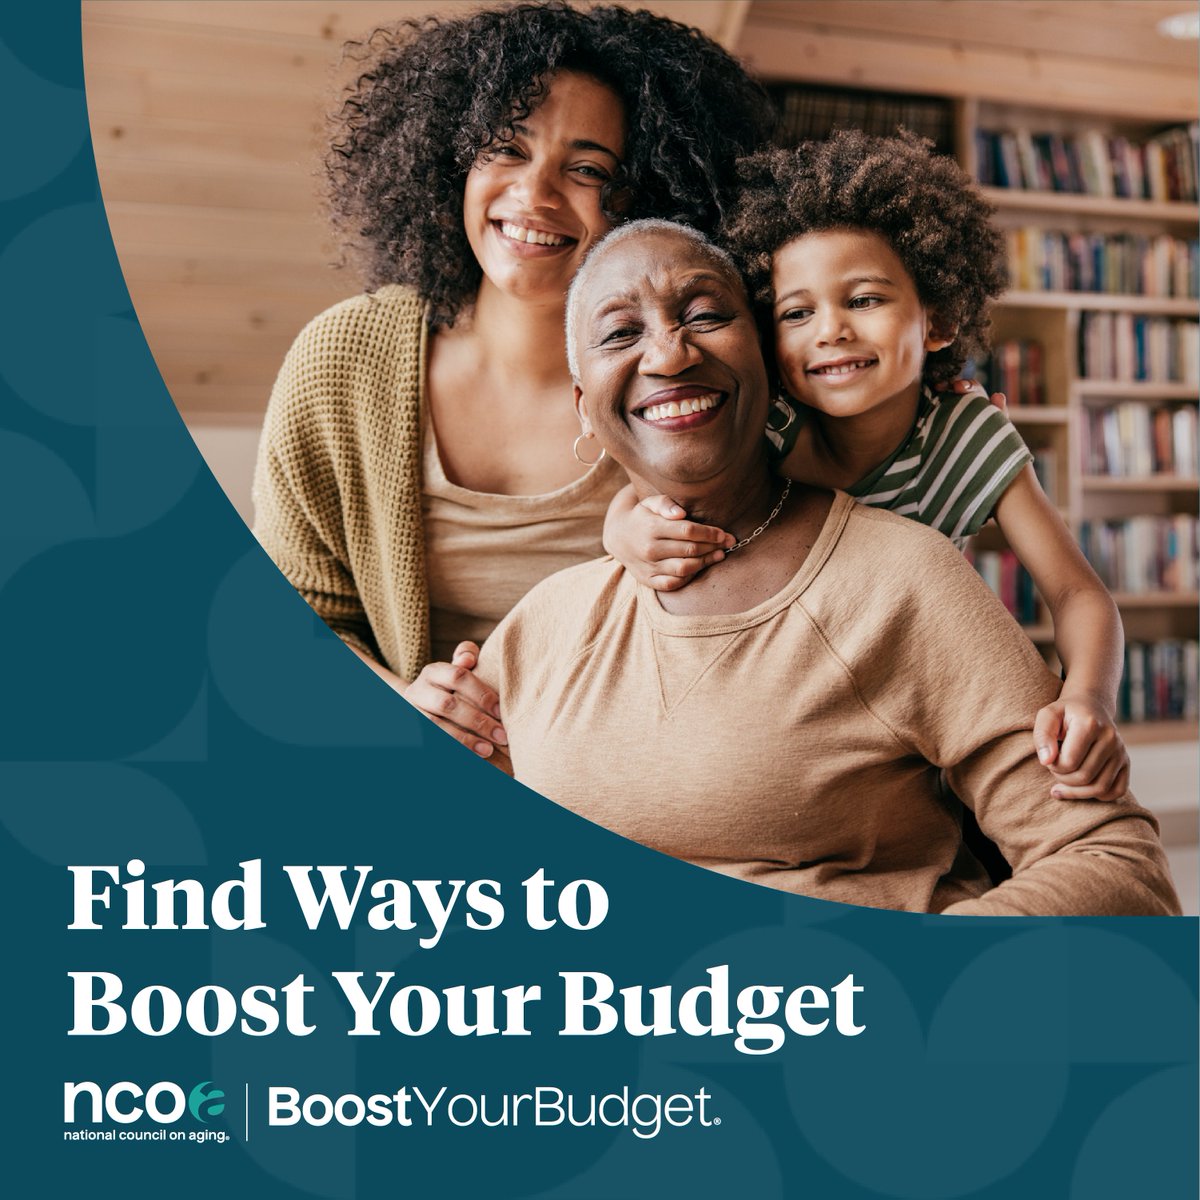 Asking for help is hard enough without wondering who you can trust for a straight answer. BenefitsCheckUp® gives personalized advice—no strings attached—on the benefits you might be eligible for. ncoa.org/Boost

#BoostYourBudgetWeek